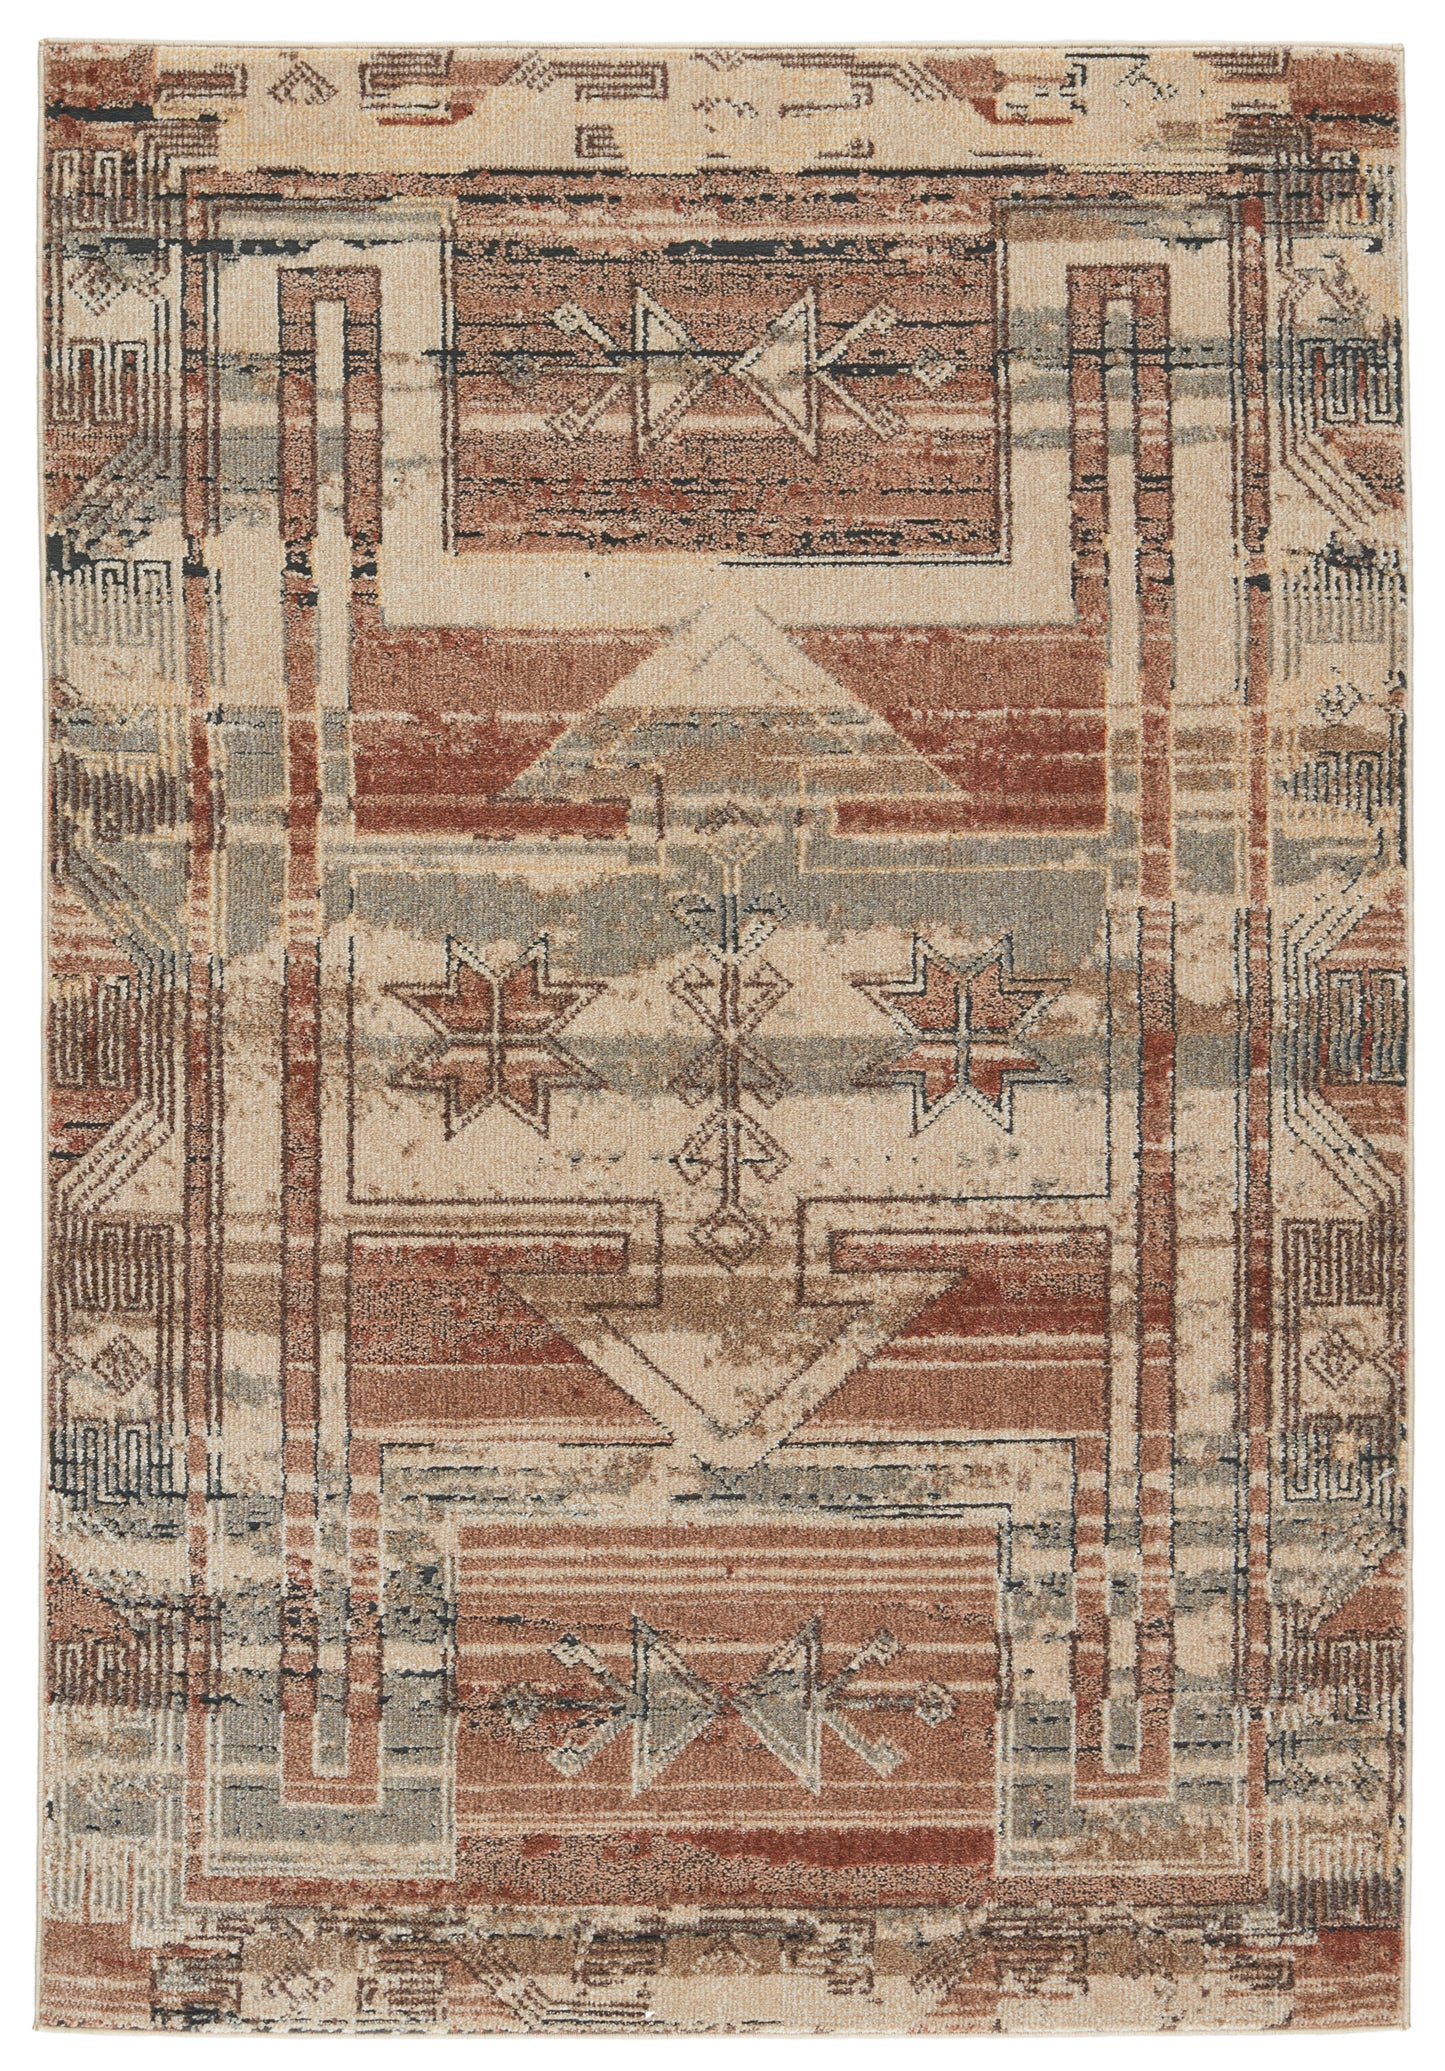 Artigas Devario Machine Made Synthetic Blend Indoor Area Rug From Vibe by Jaipur Living